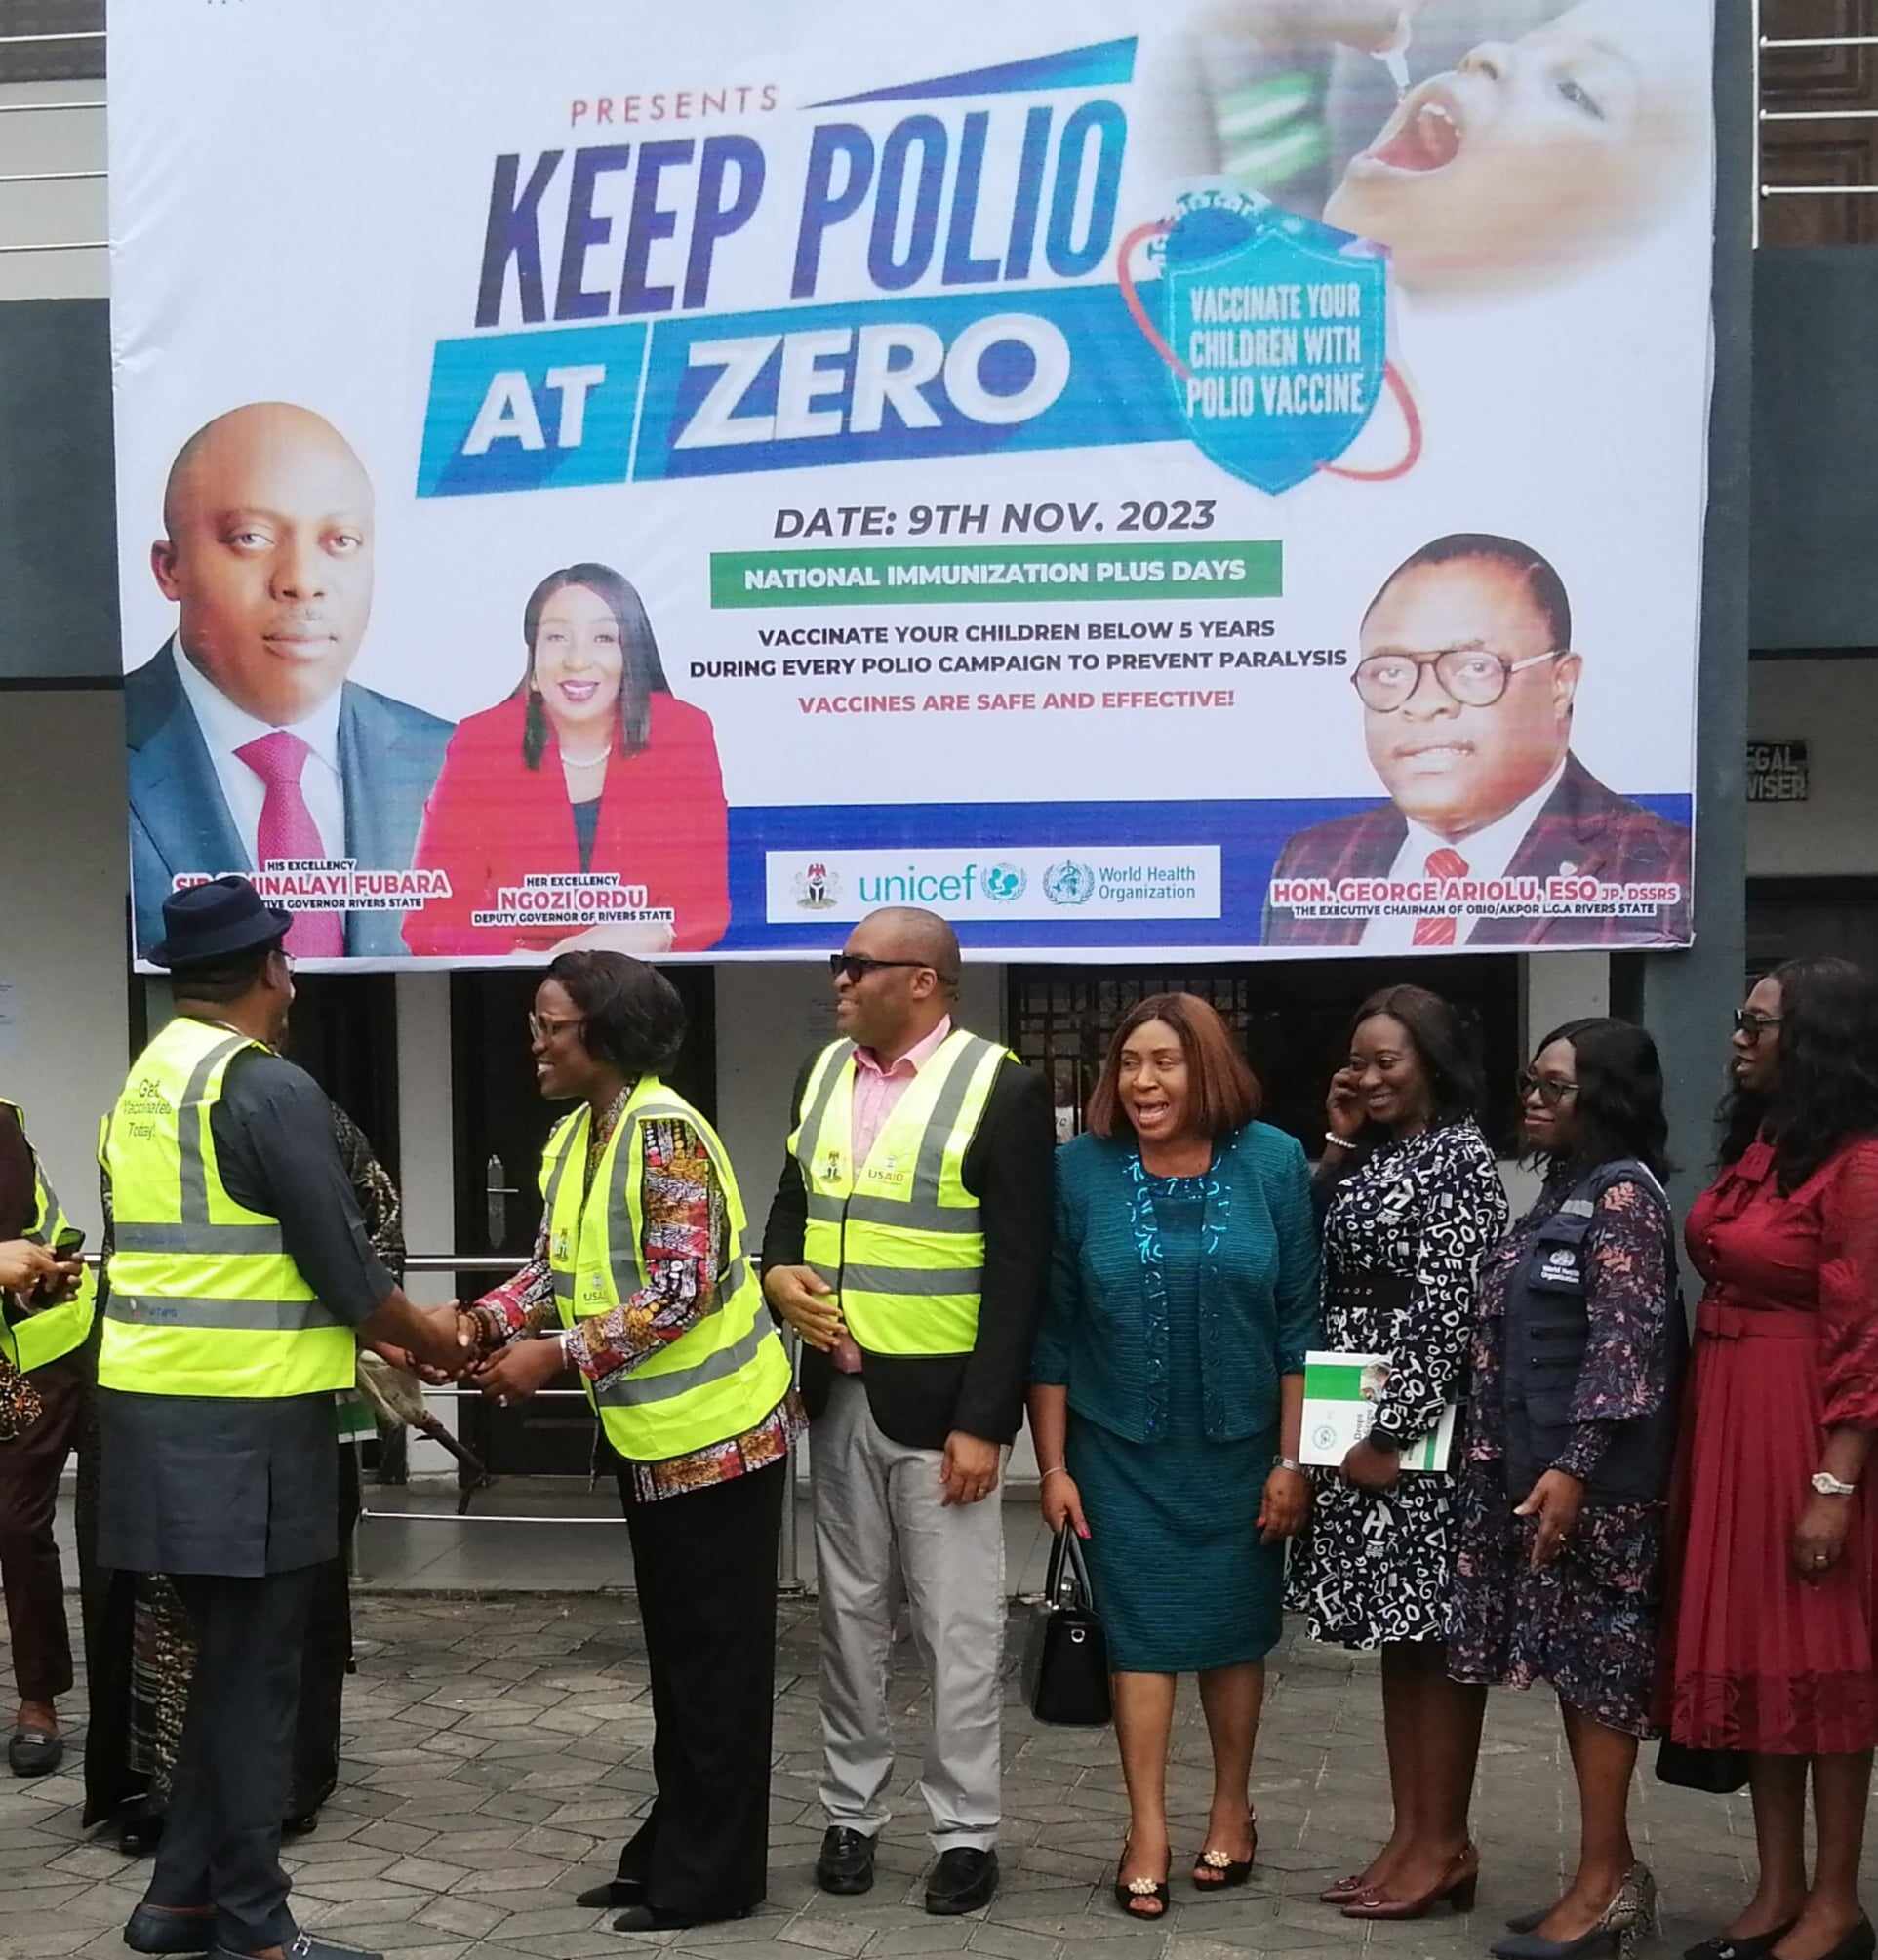 Keep Polio At Zero Campaign: Primary Healthcare Mgt Boss Urge Parents, Churches, School To Ensure Children Are Vaccinated